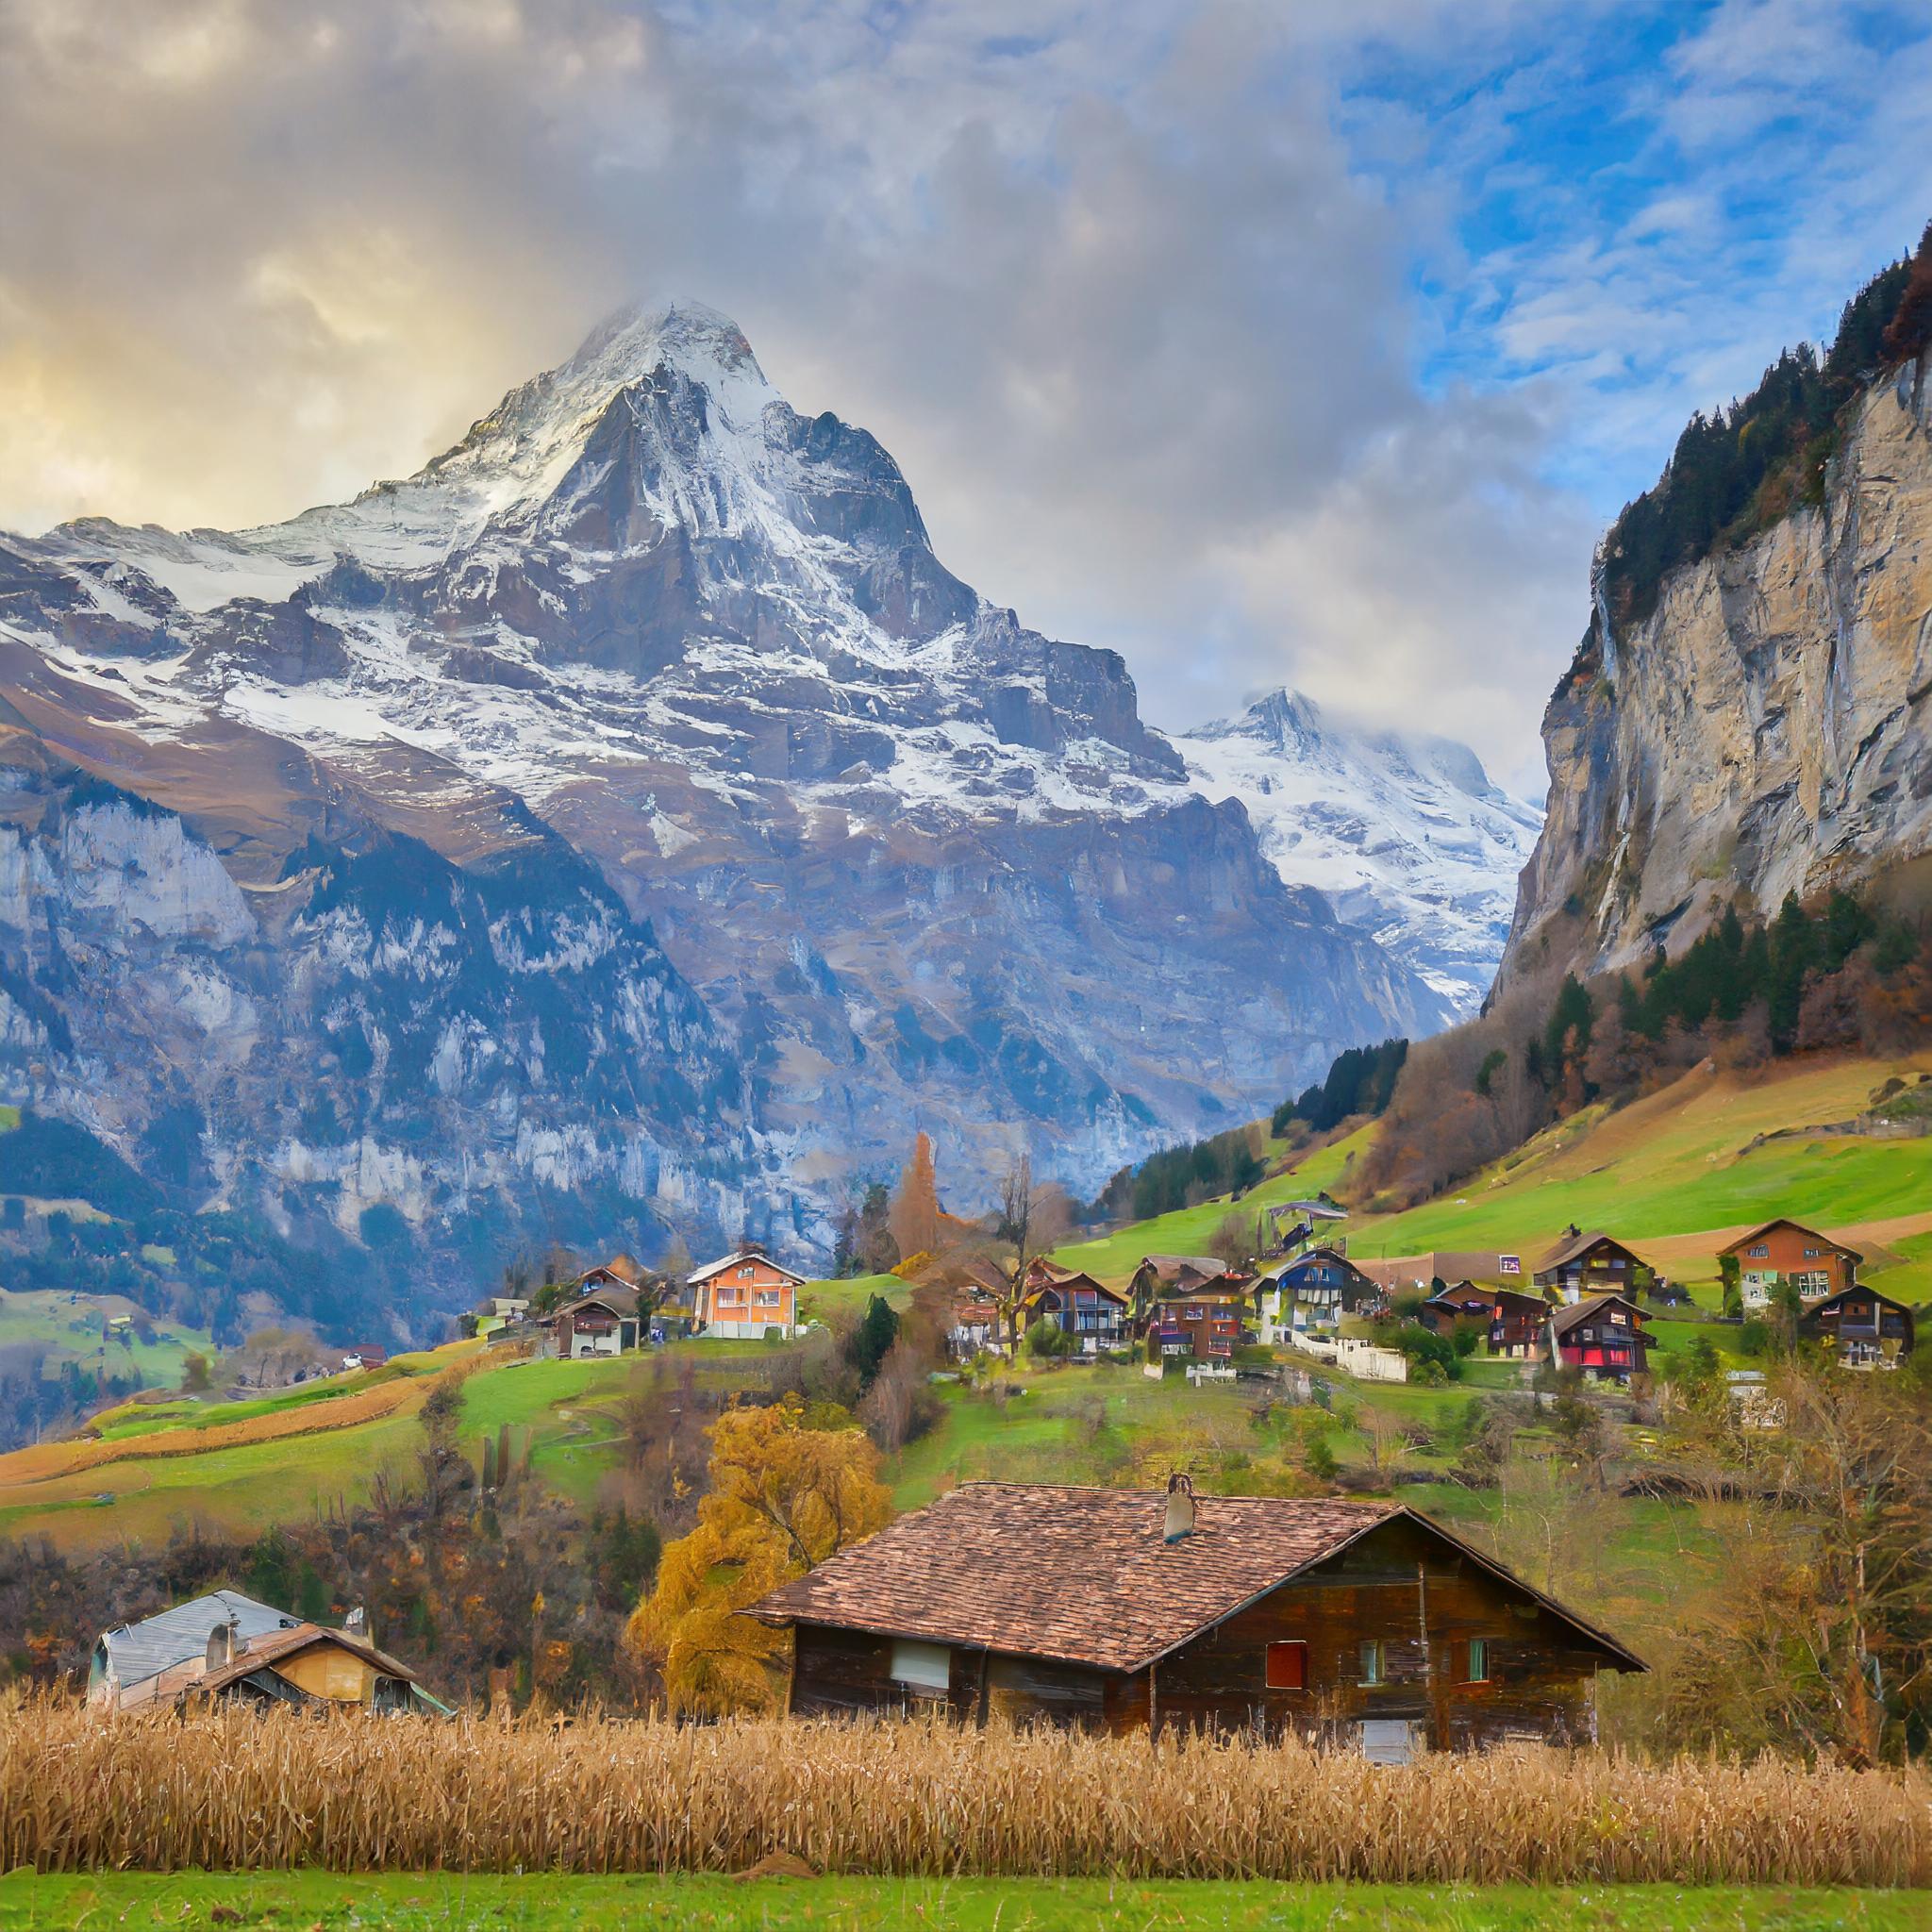  Mountain and village view of Switzerland